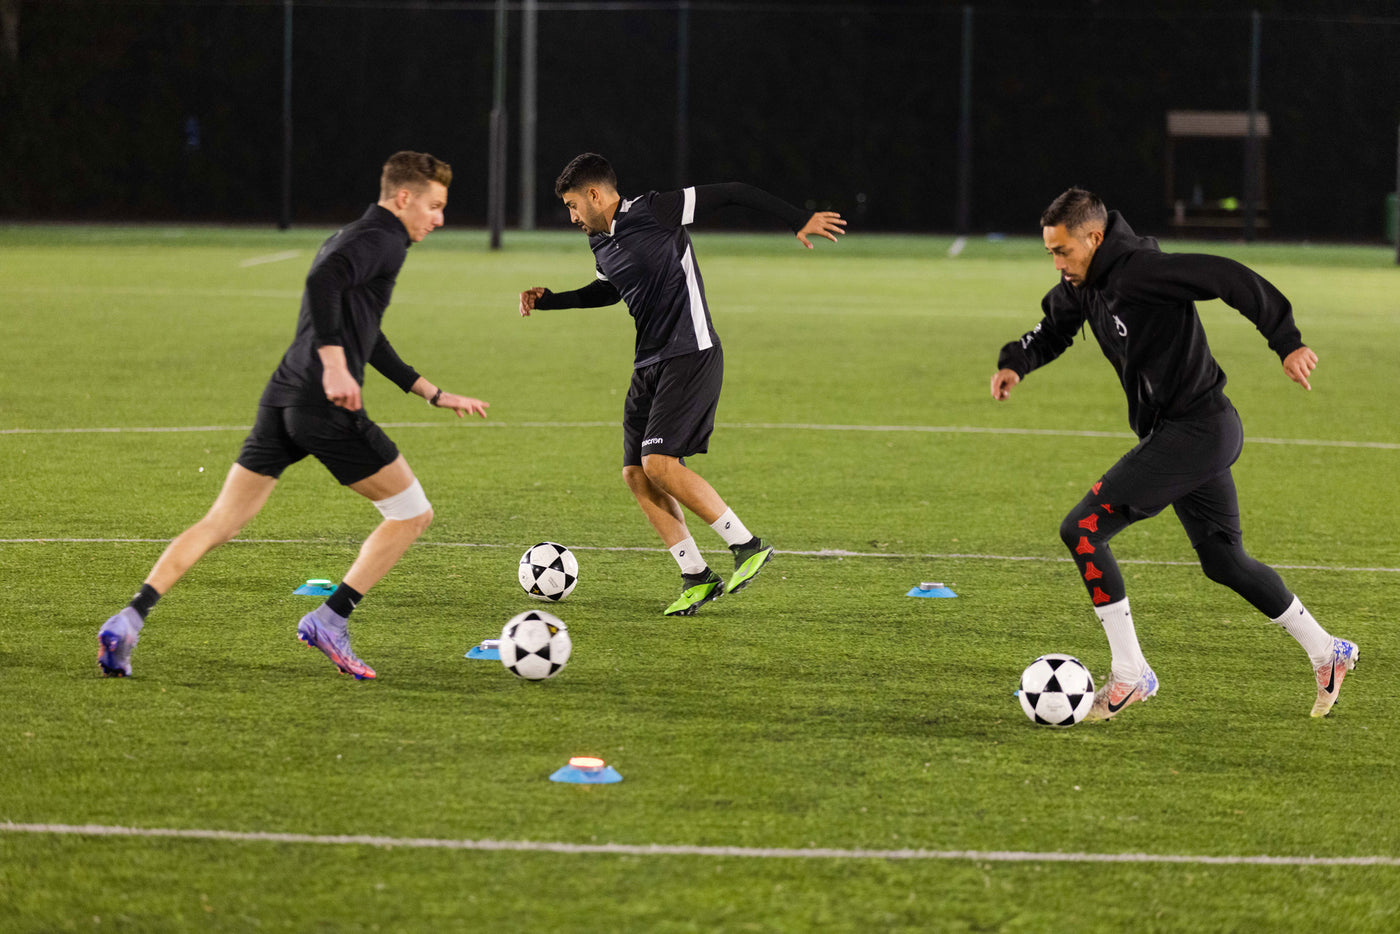 Why soccer players need new-age reaction training